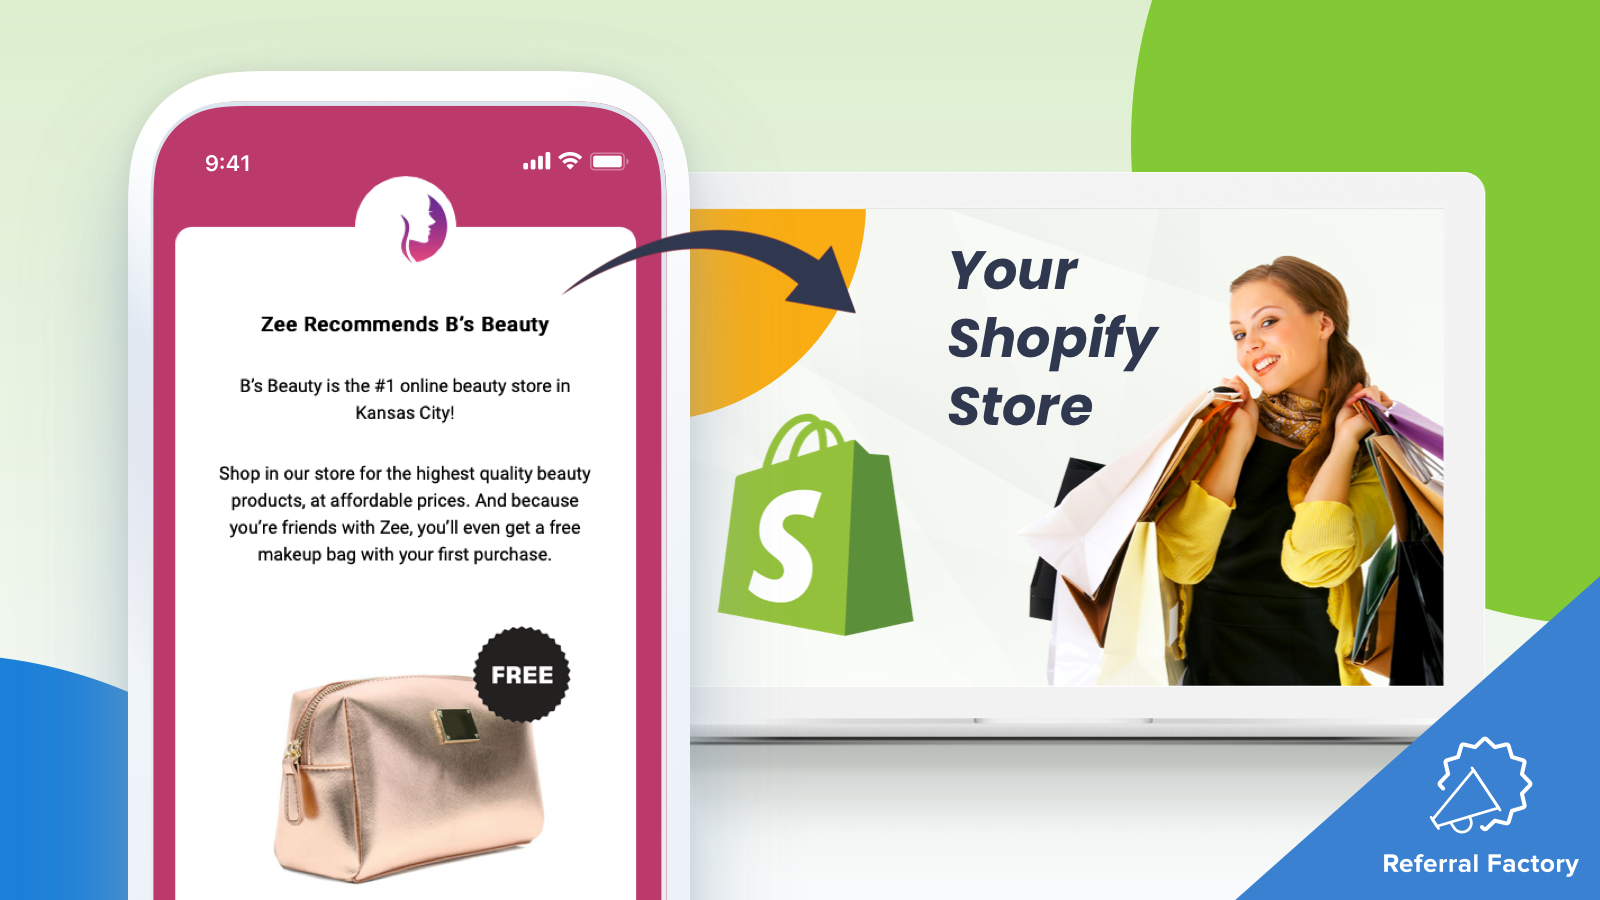 Easily integrate a referral program for your Shopify Store